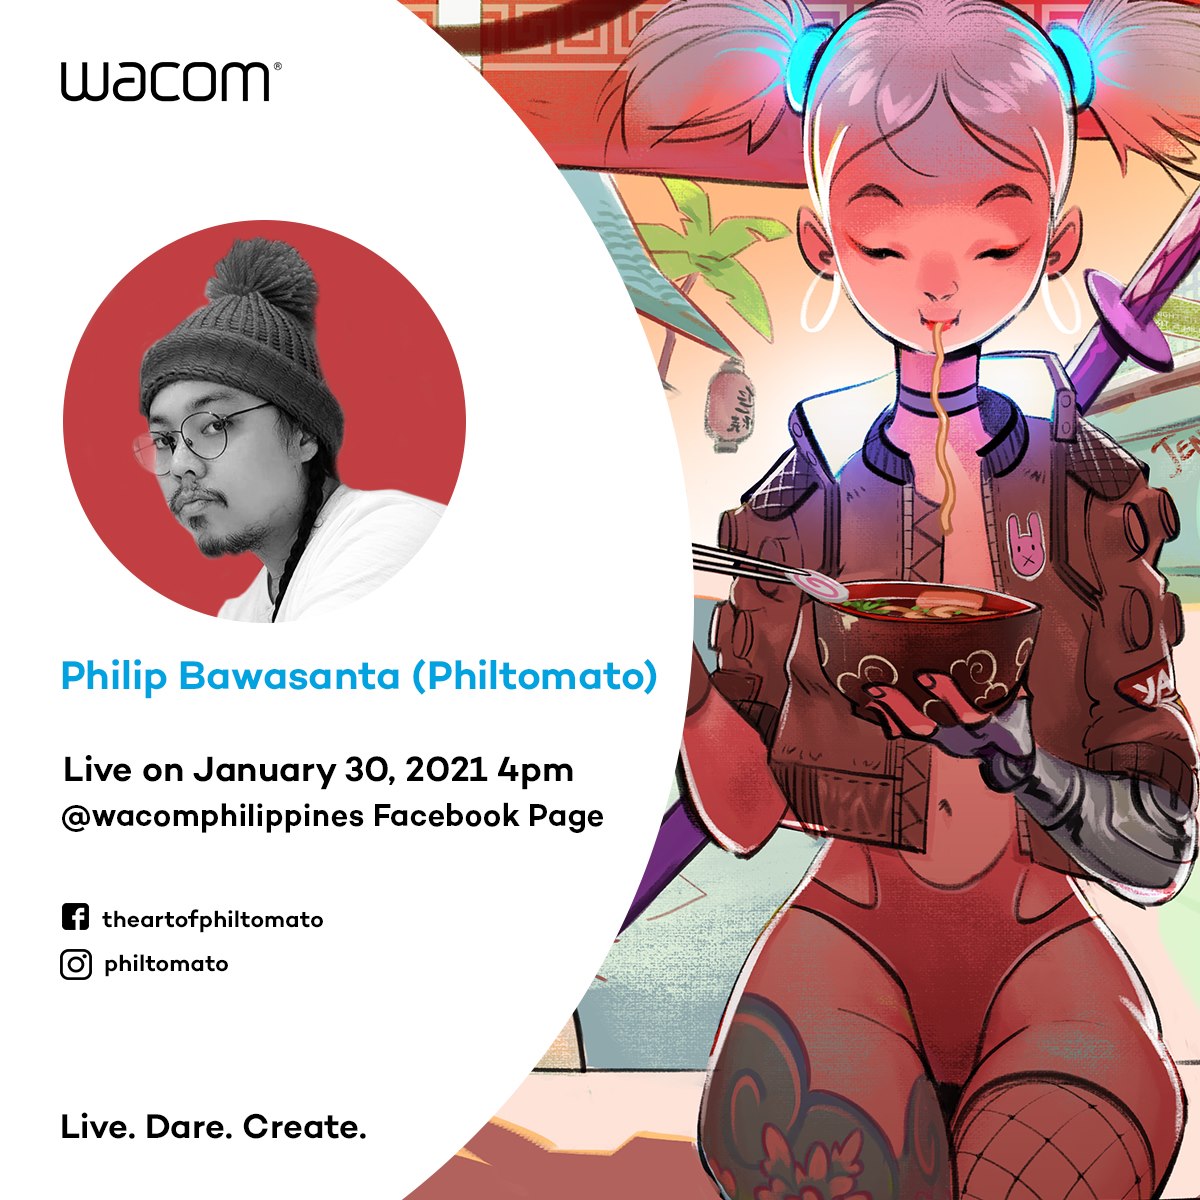 I'll be going live on saturday during @wacom 's live stream to talk about gesture and flow. Please catch the stream and say hi! https://t.co/gIMBPXvW1A 